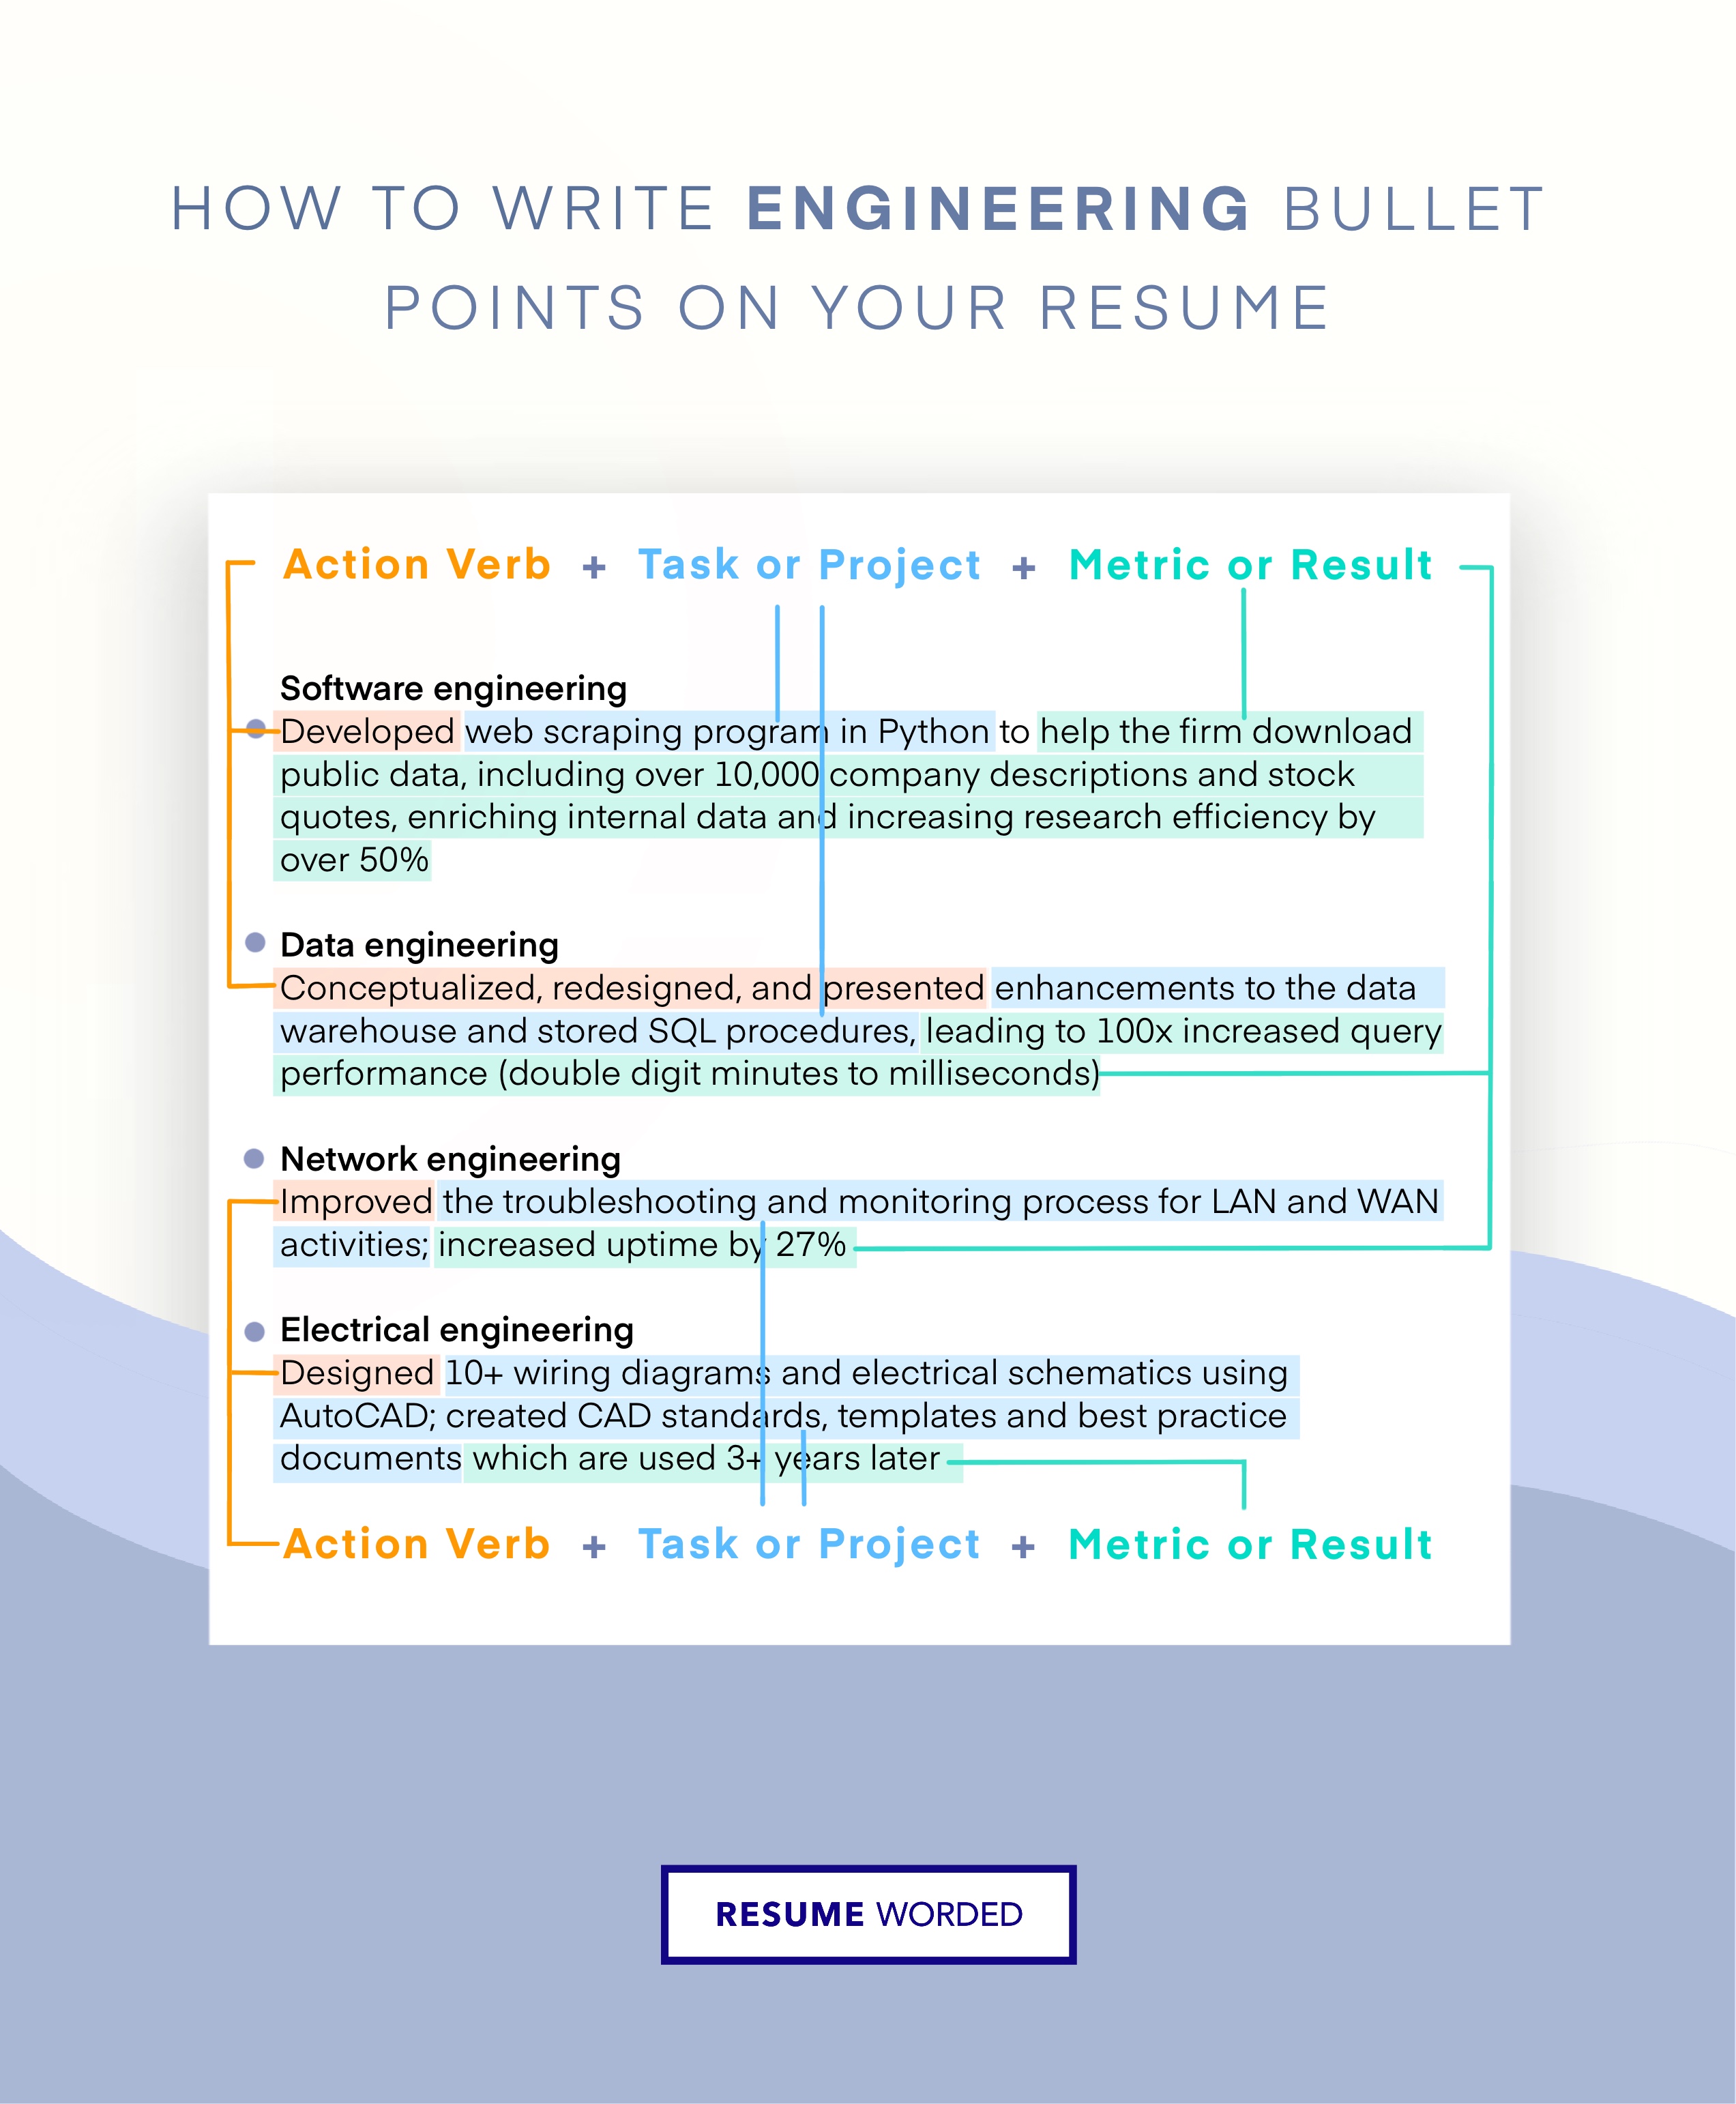 Prioritize your technical skills. - Analytics Manager Resume